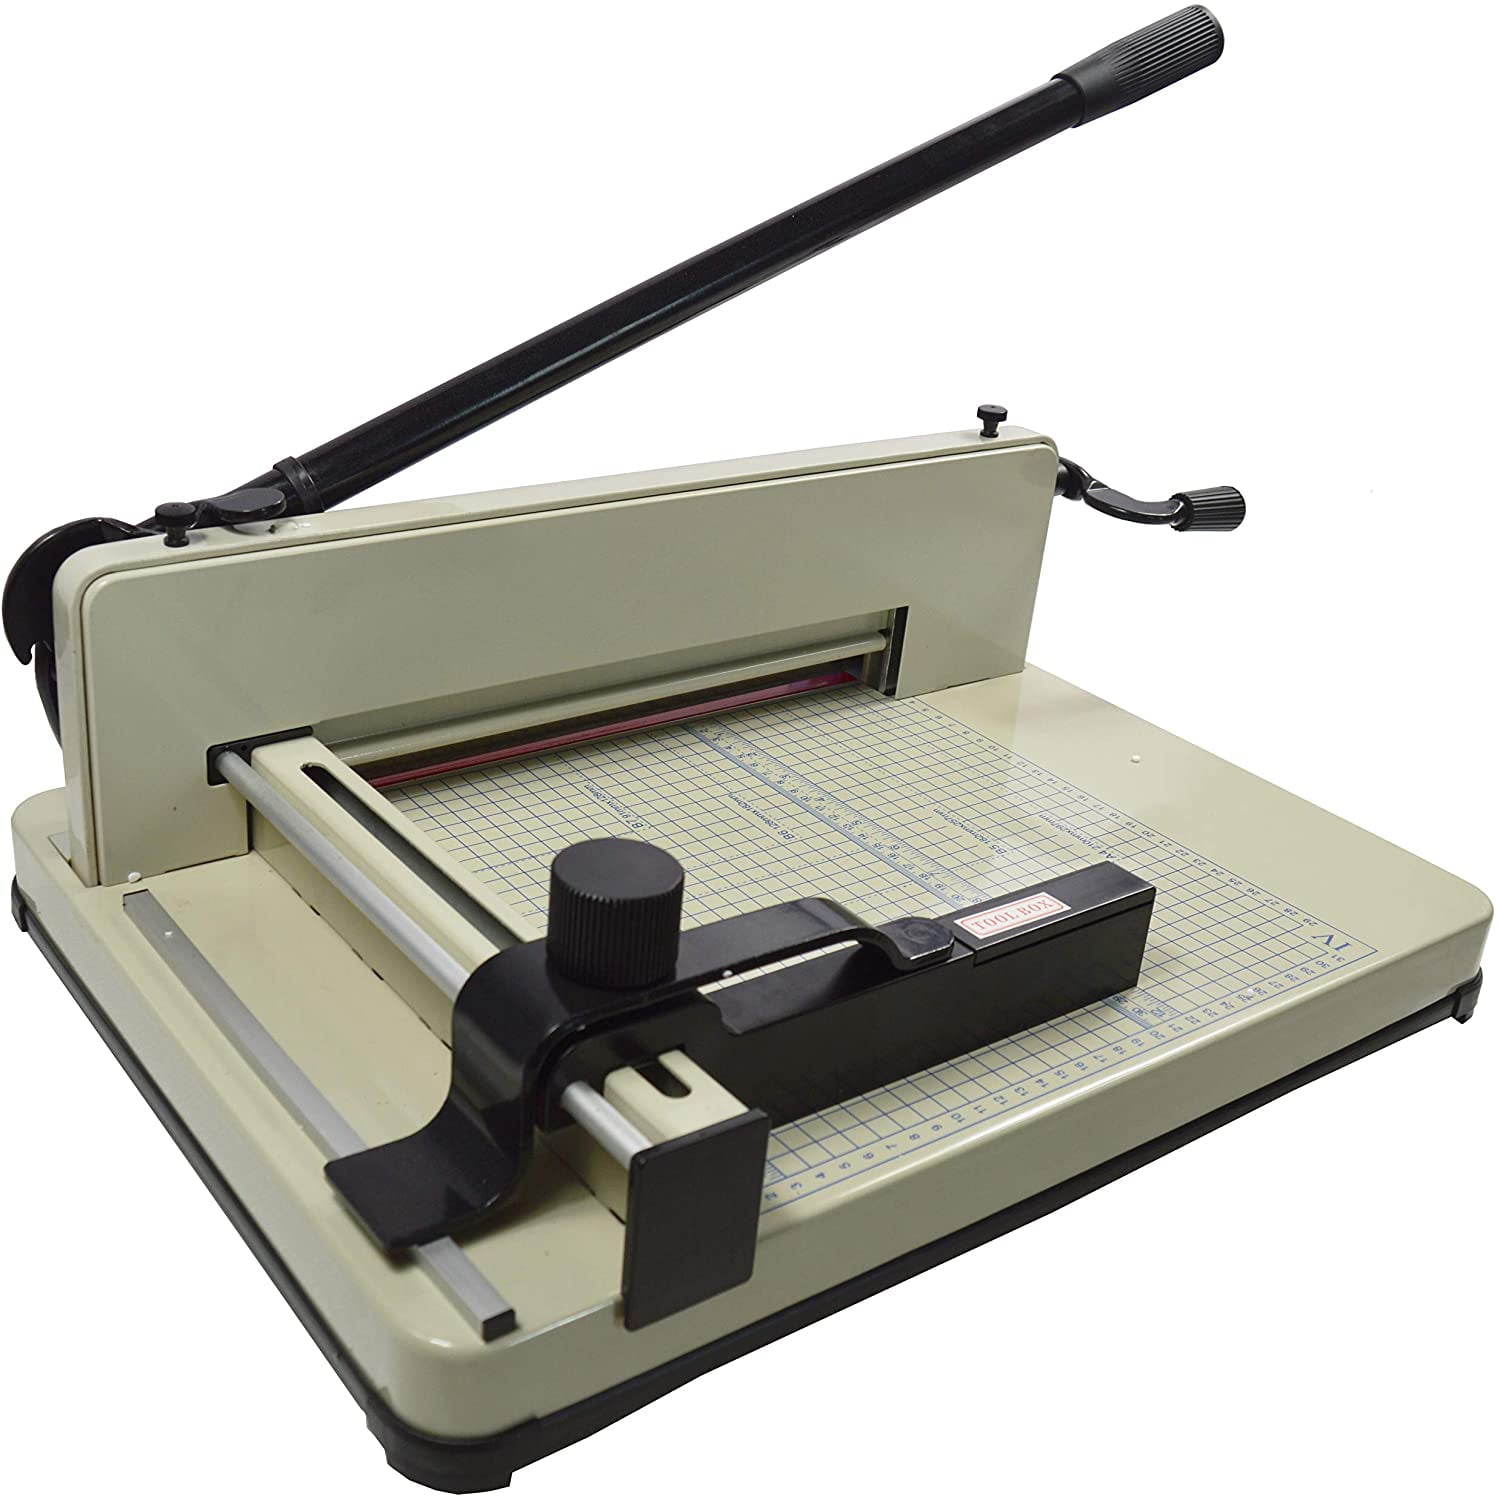 Easy Buy 490R 19 ELECTRIC STACK PAPER CUTTER Industrial, HEAVY DUTY